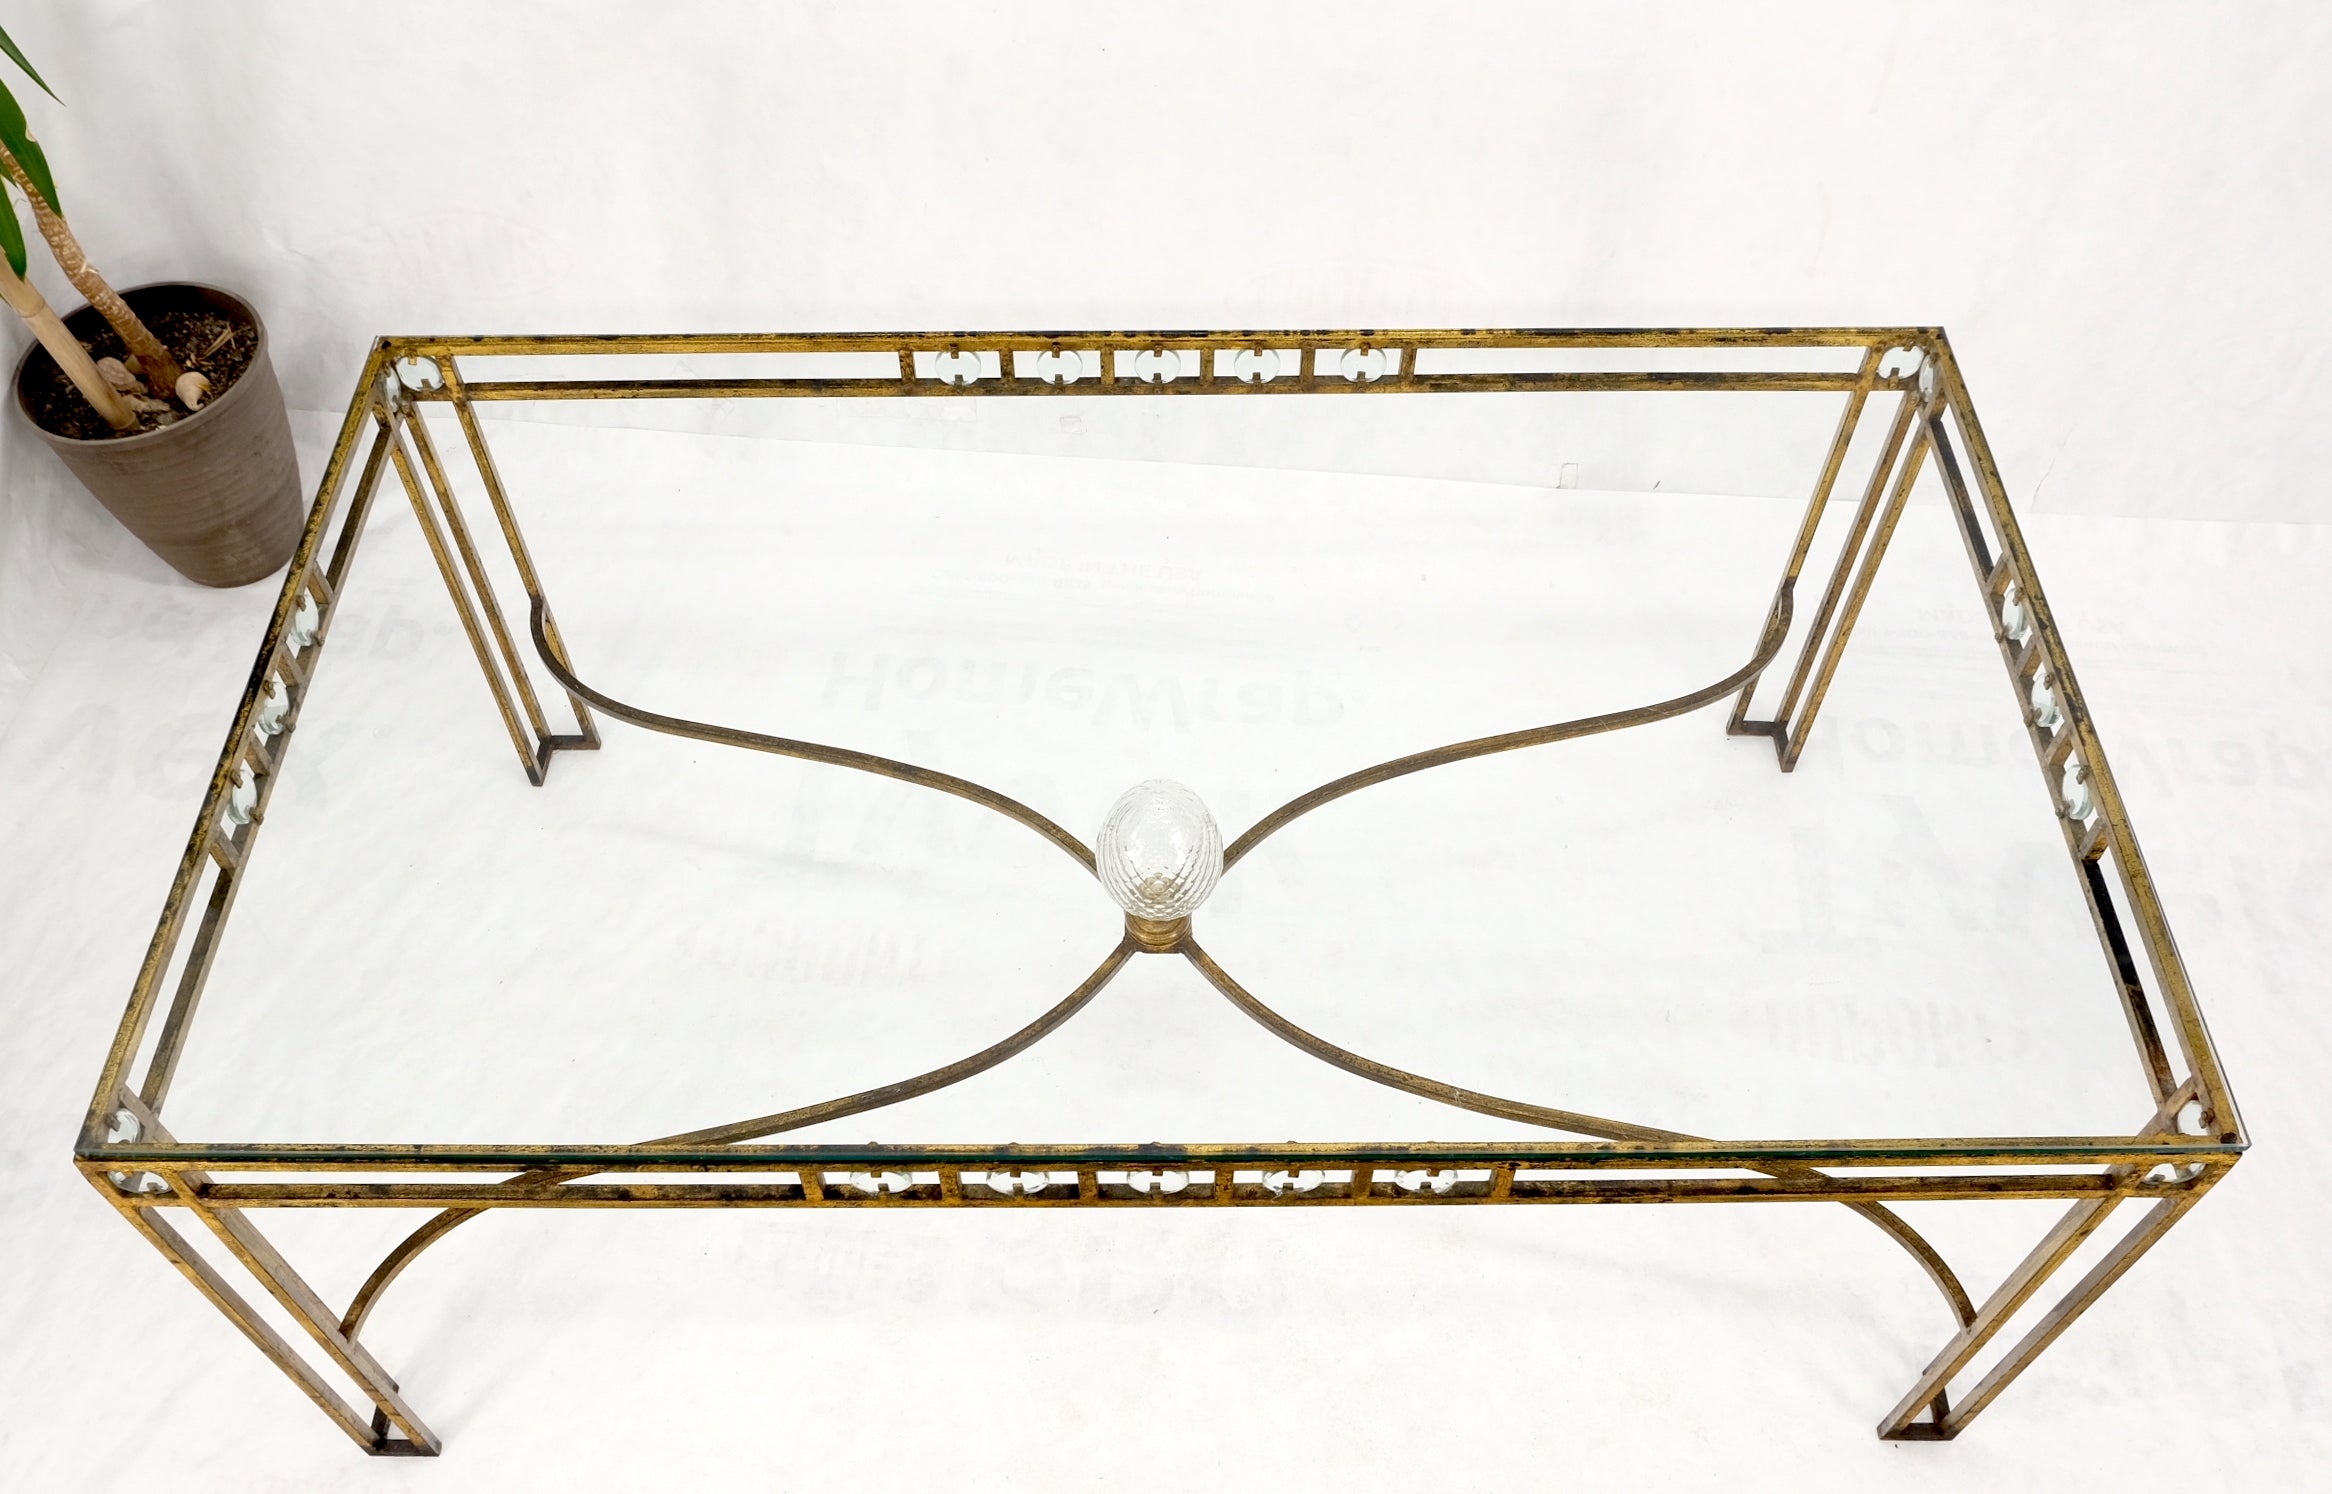 Large gold gilt iron base glass top cut glass inserts finial dining conference table. Hollywood Regency decor match.